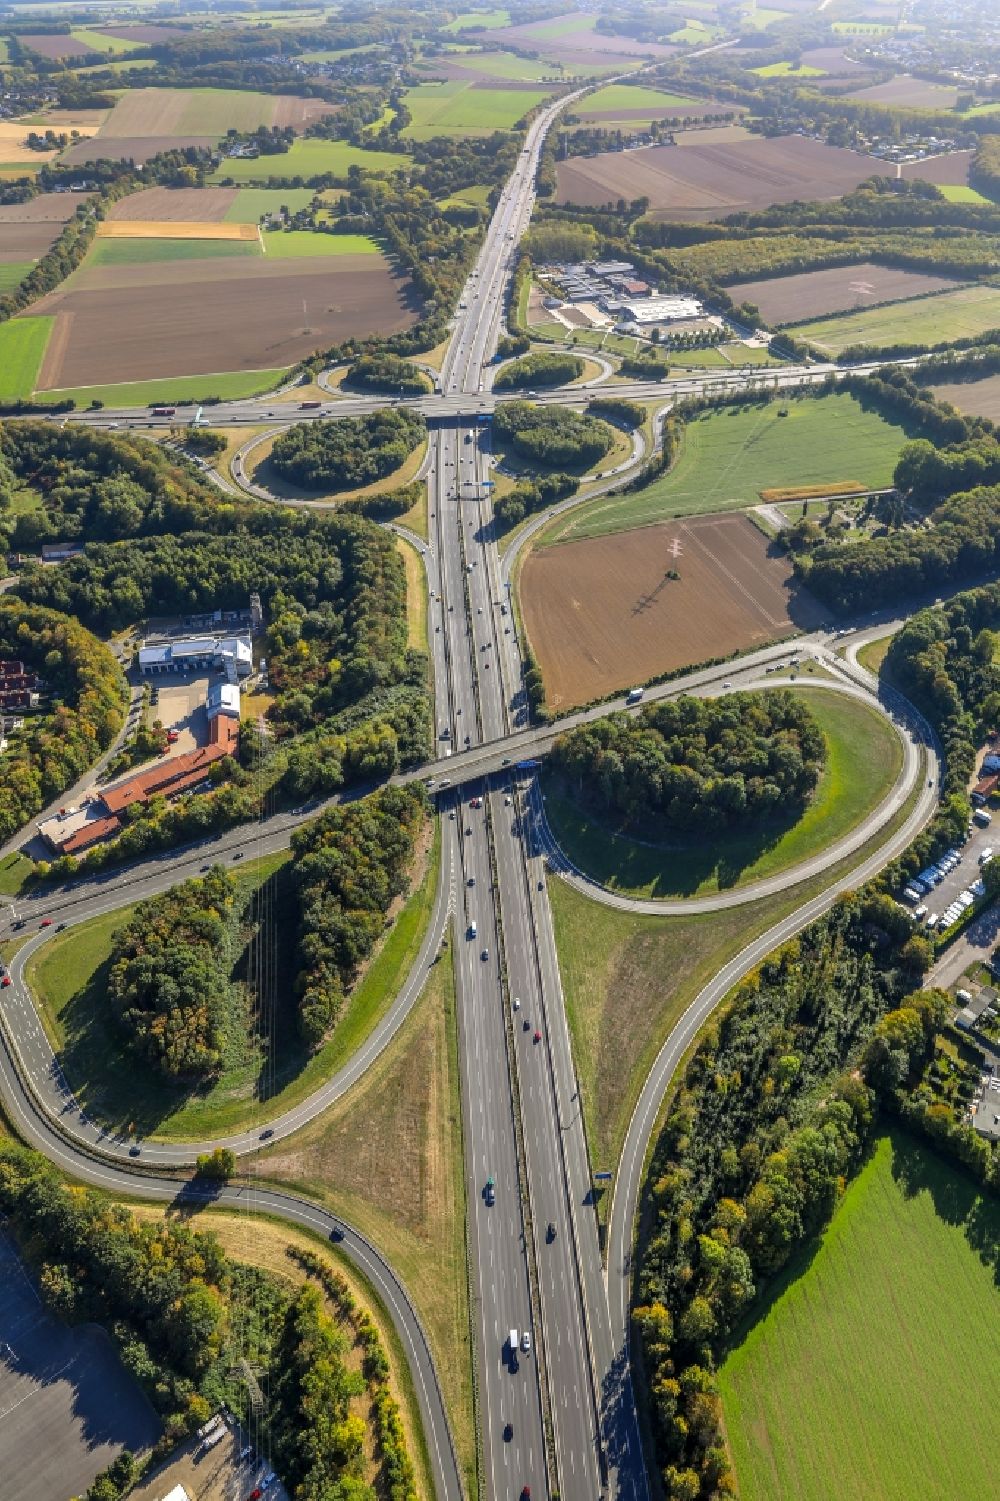 Unna from the bird's eye view: Motorway triangle - exit of the AD of the BAB A1 Dortmund Unna and the federal road B1 in Unna in the federal state North Rhine-Westphalia, Germany